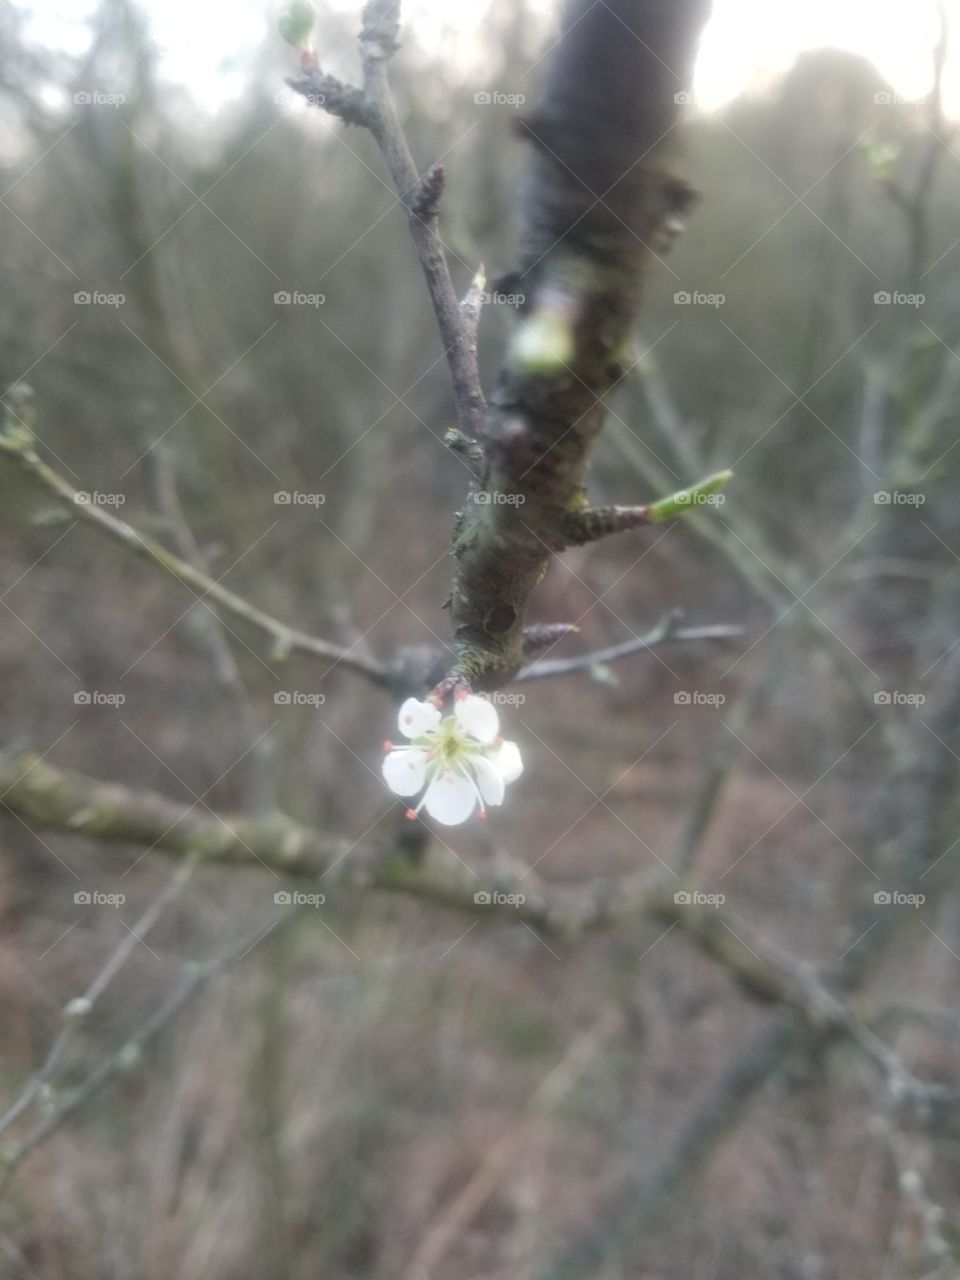 The very first flower of spring is a magical thing. This blossom is on a Chickasaw plum tree (Prunus angustifolia).